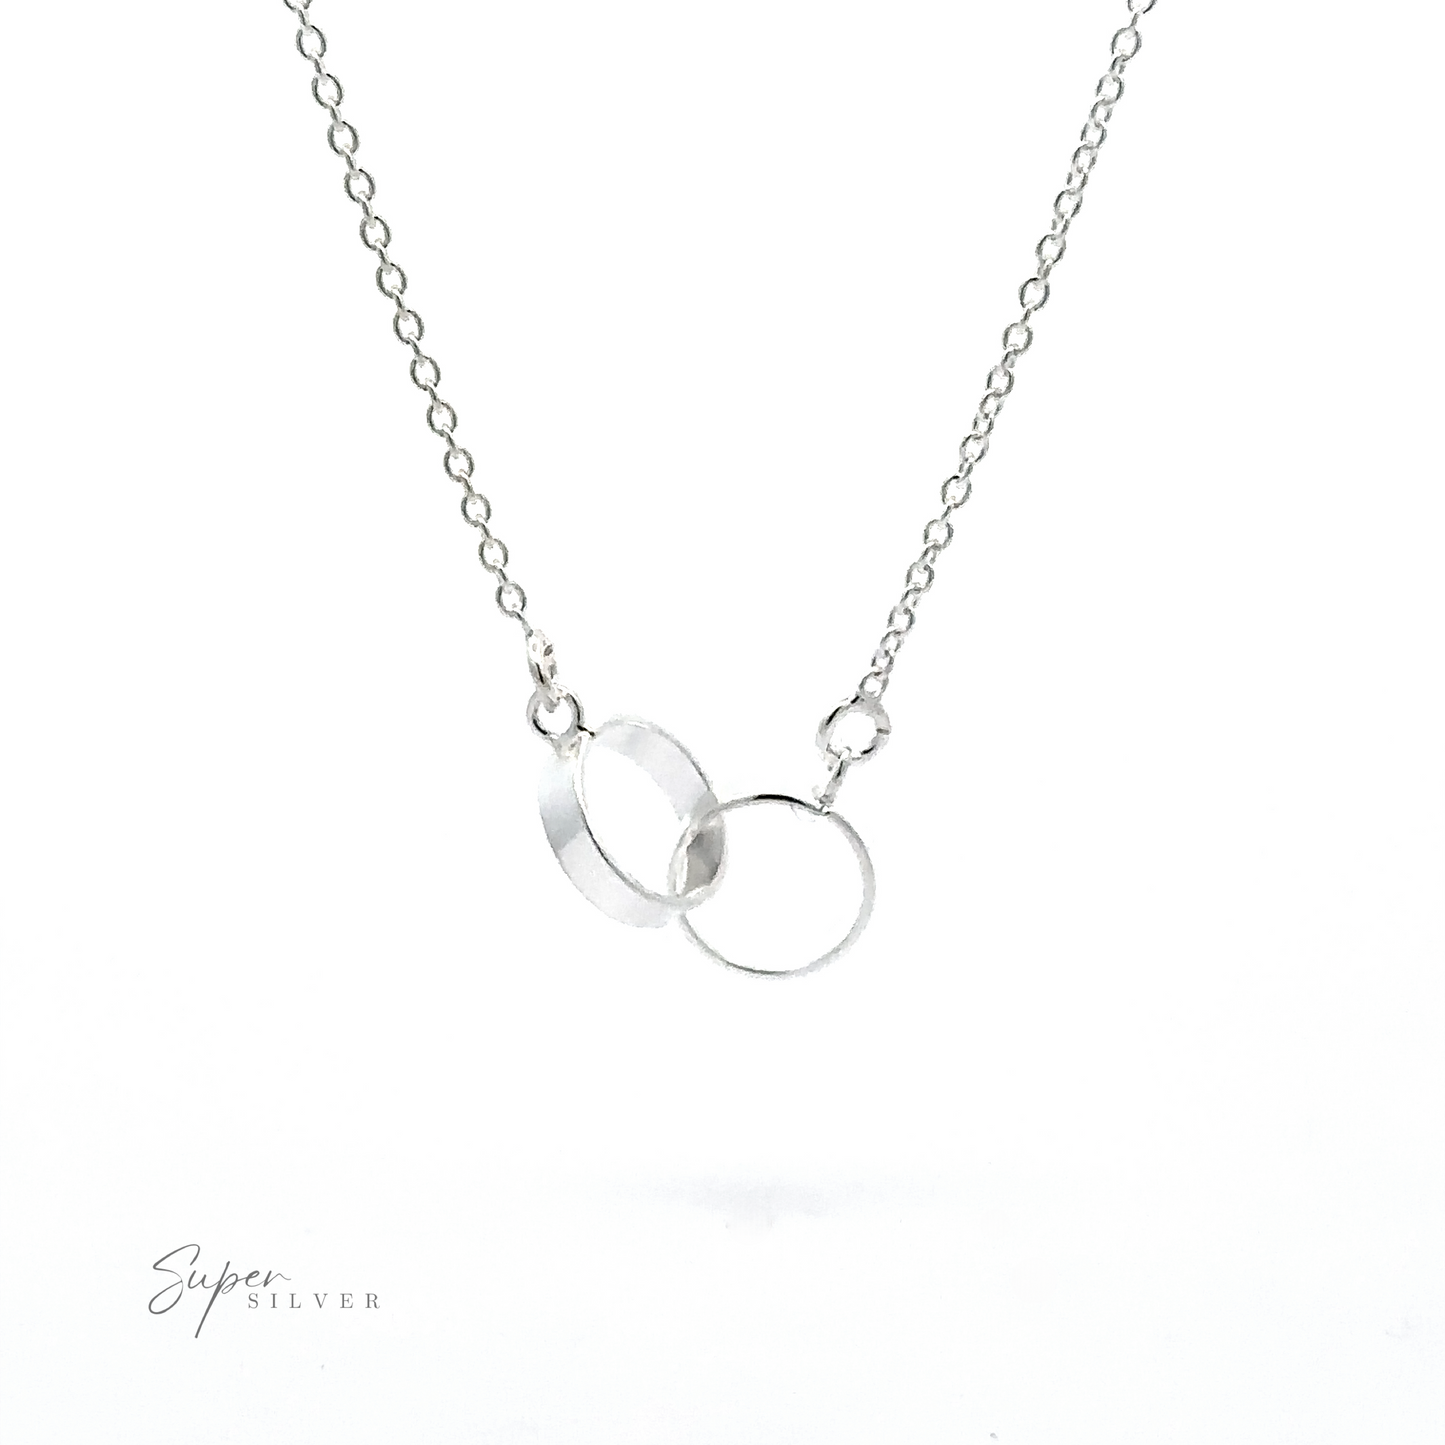 A Double Circle Necklace featuring two delicate interlocking rings on a fine chain, symbolizing an eternal bond. The image includes the logo "Super Silver" on the bottom left corner.